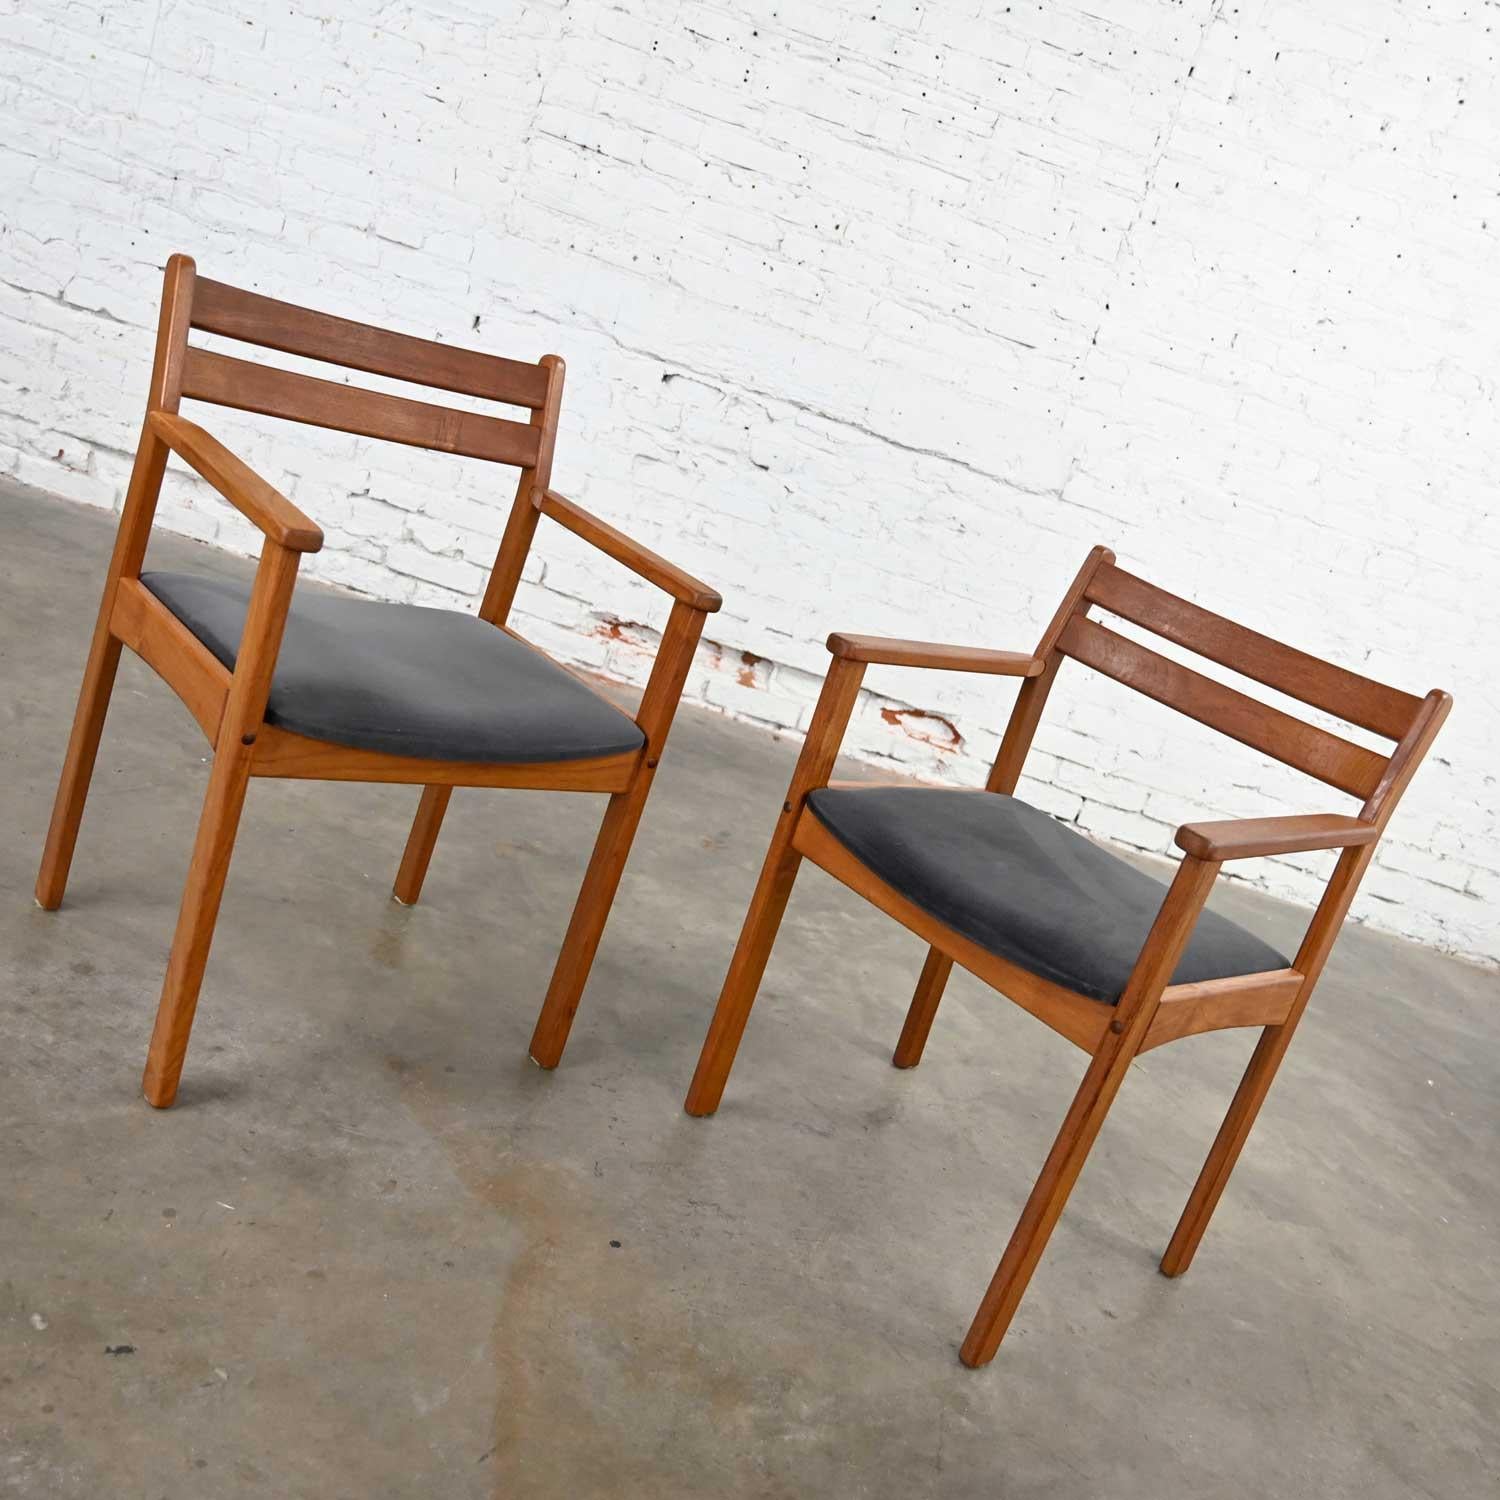 20th Century Scandinavian Modern Teak Pair of Armchairs with Brushed Charcoal Fabric Seats For Sale